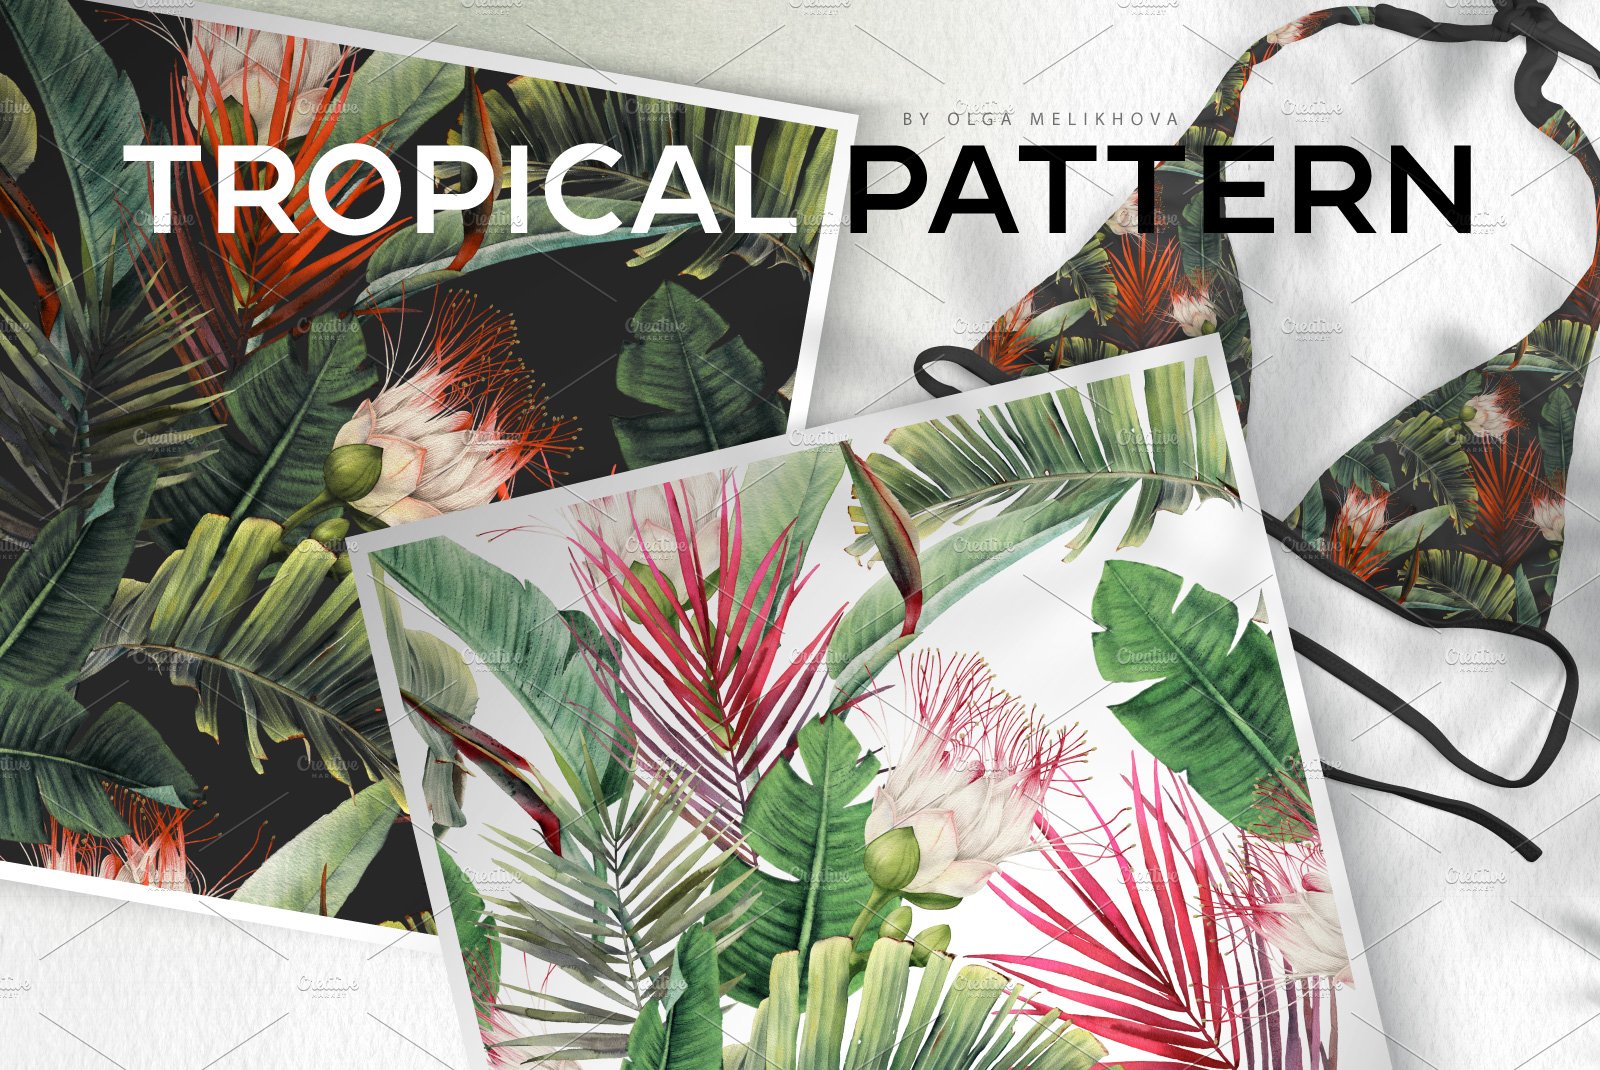 TROPICAL PATTERN cover image.